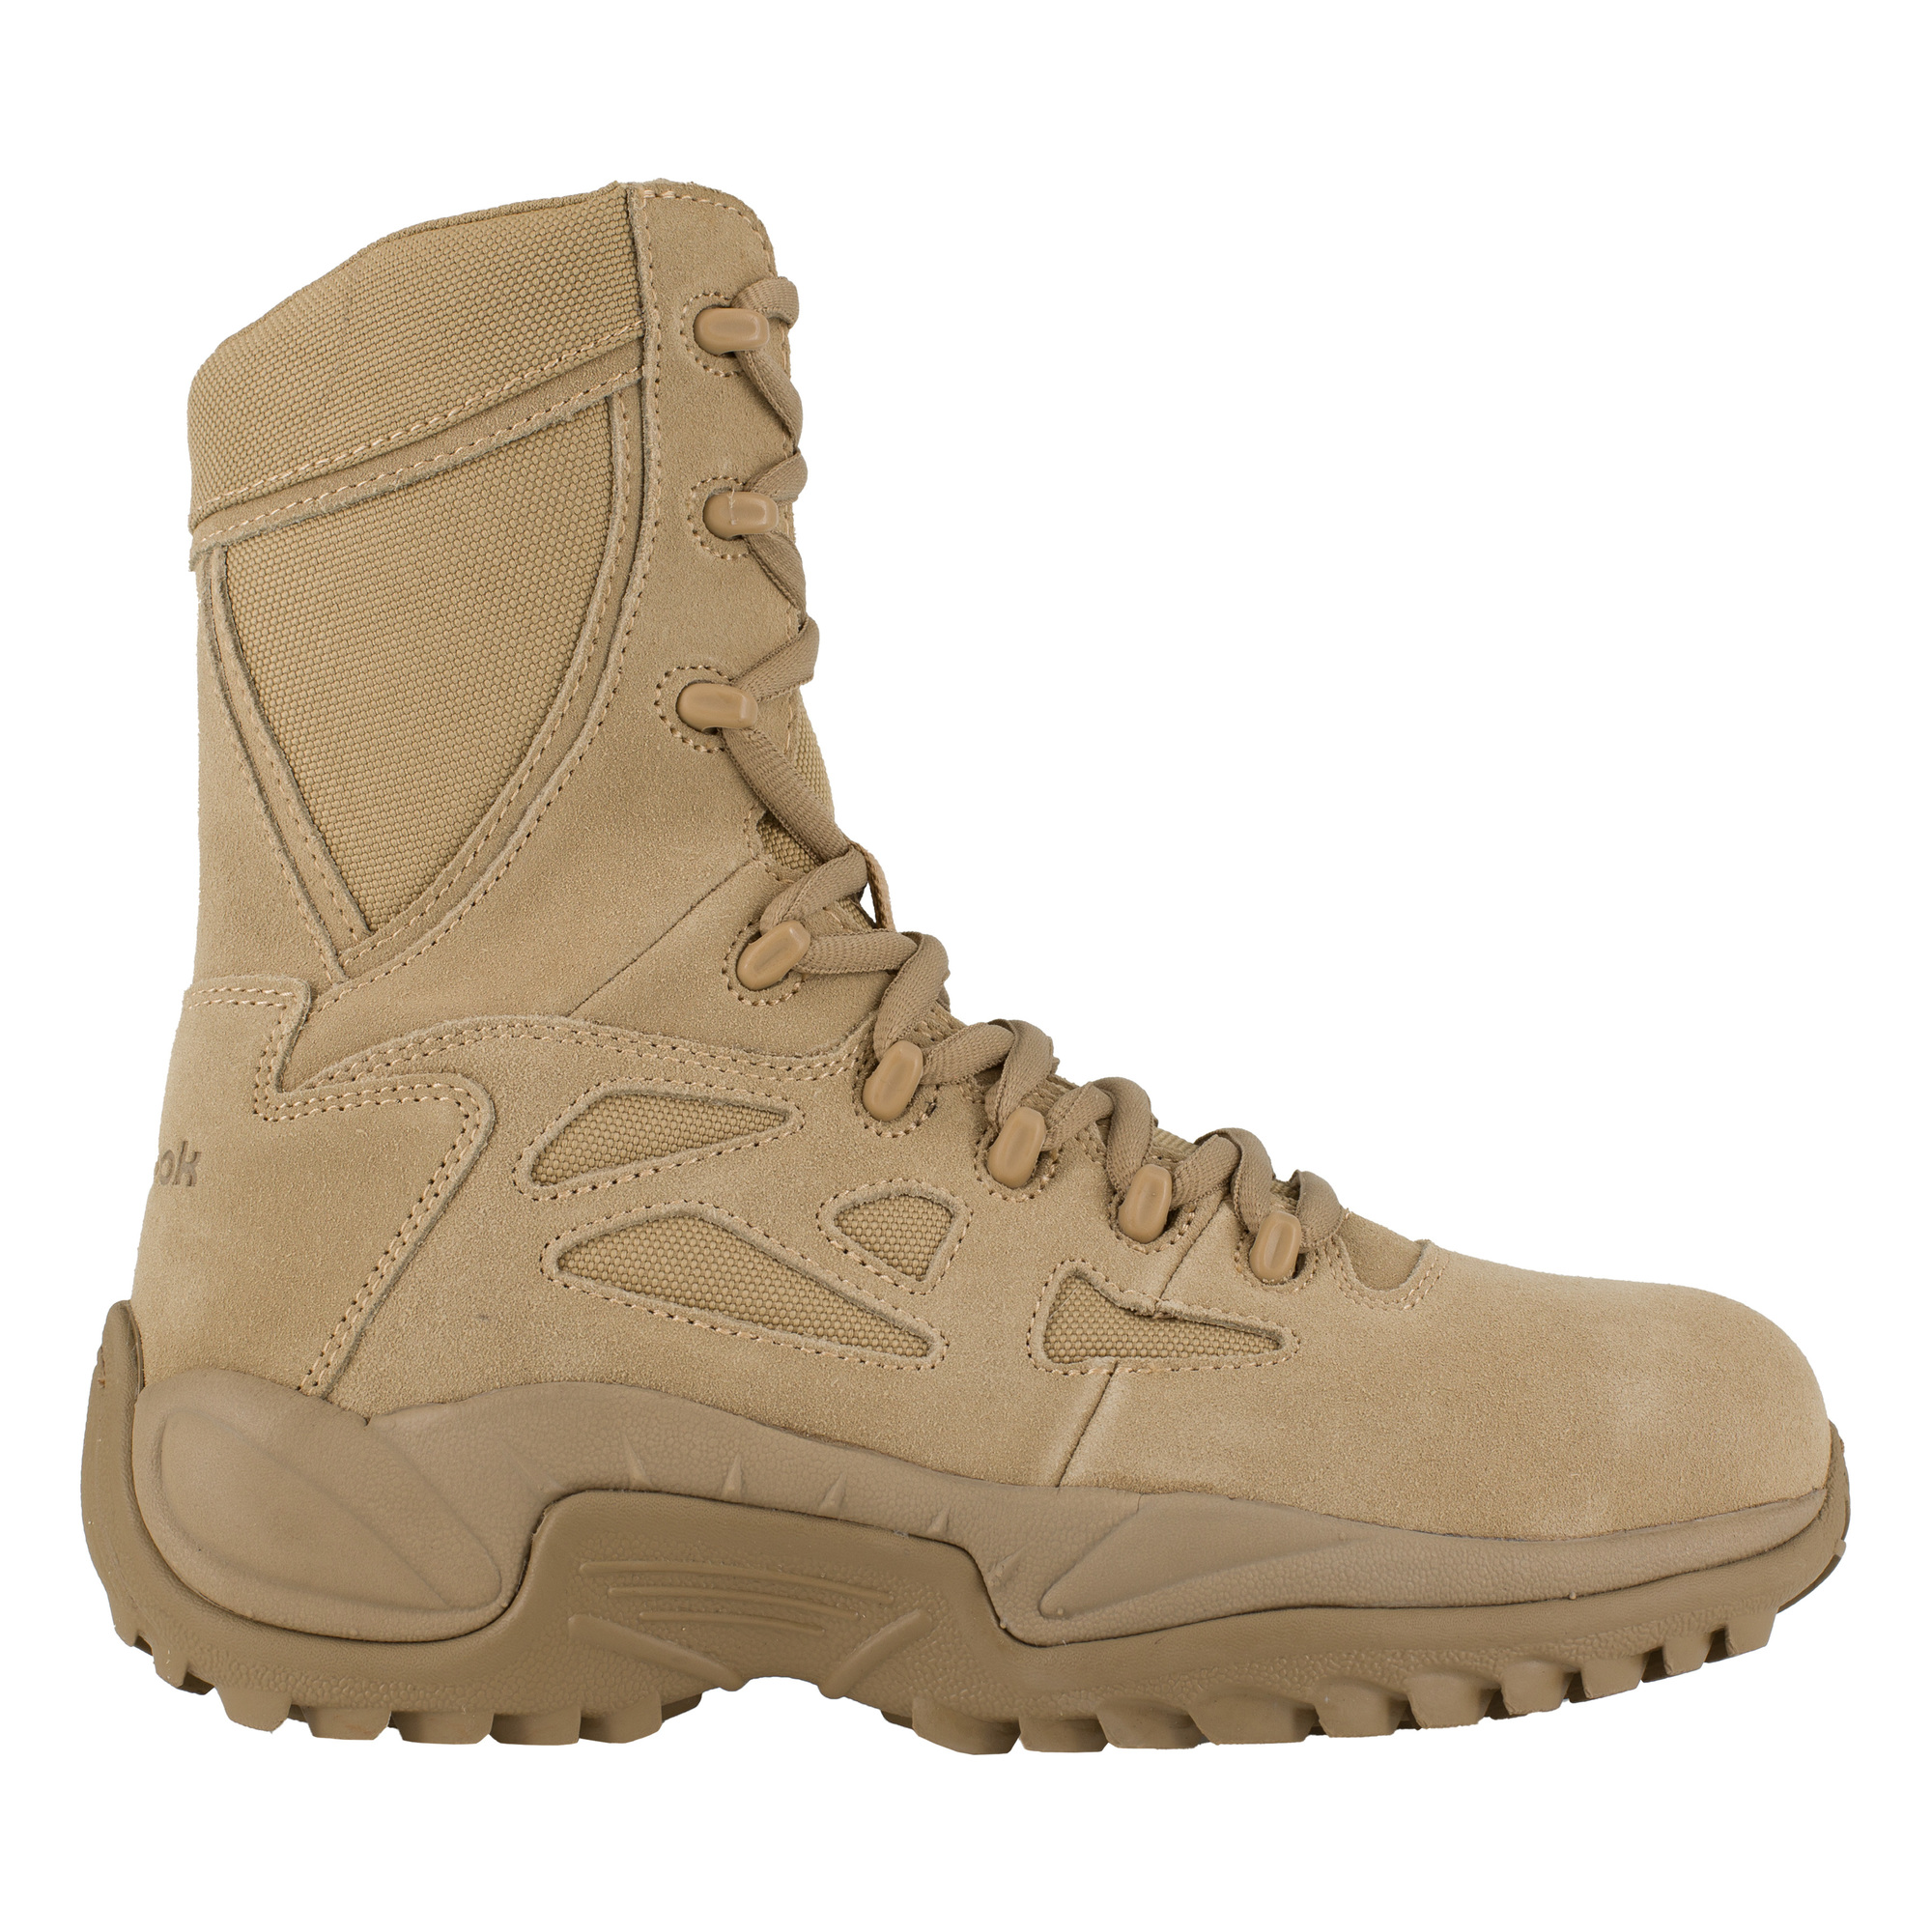 Reebok, 8Inch Stealth Tactical Boot with Side Zipper, Size 9 1/2, Width Wide, Color Desert Tan, Model RB894 -  RB894-W-09.5